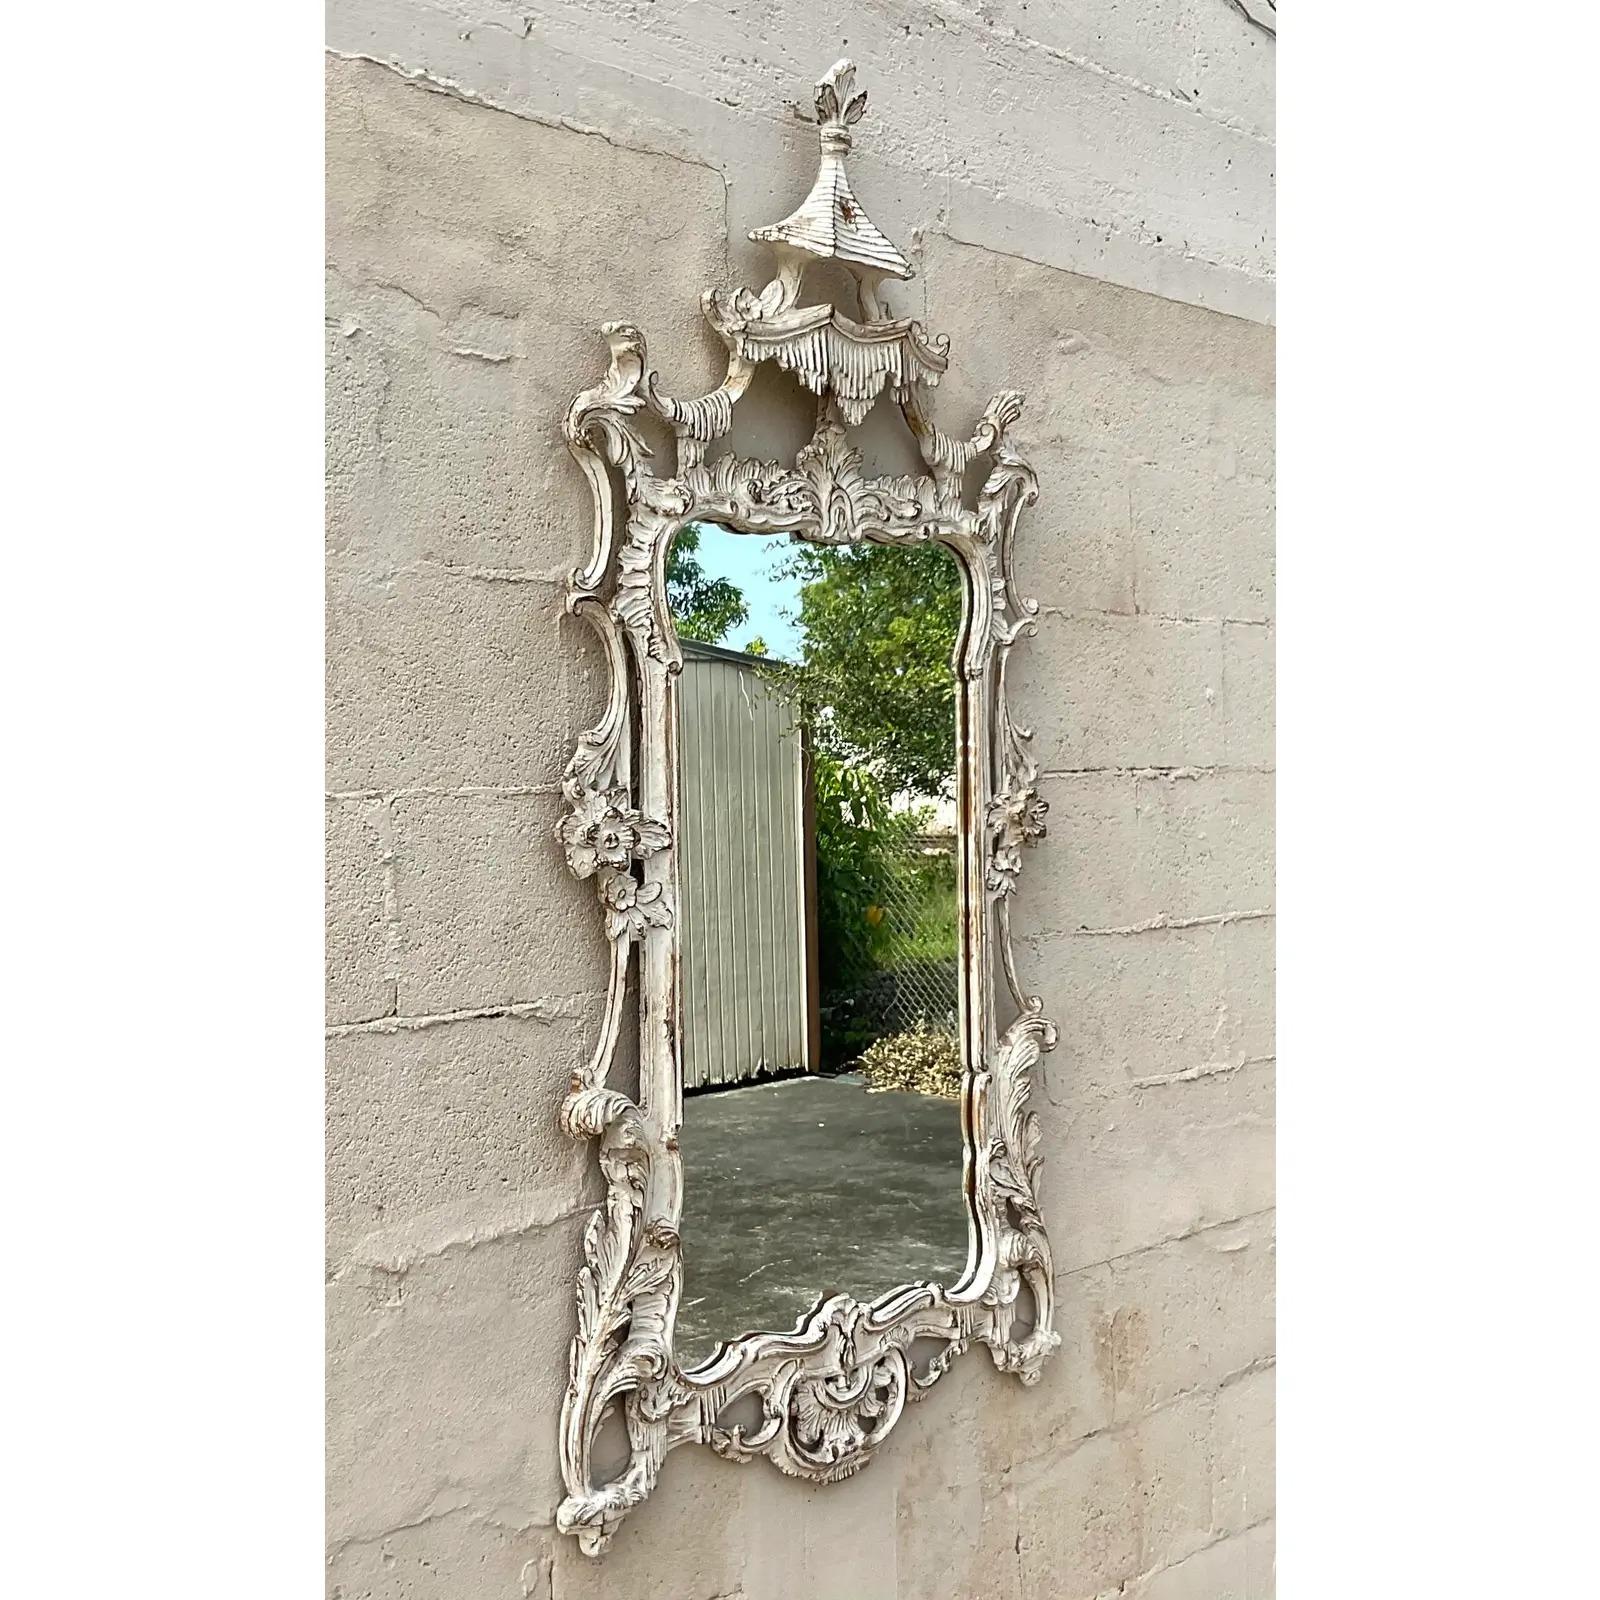 Fantastic vintage hand carved Chinoiserie mirror. A beautiful carved pagoda mirror with a charming little pagoda roof top. A chic cerused finish adds to the glamour. Acquired from a Palm Beach estate.